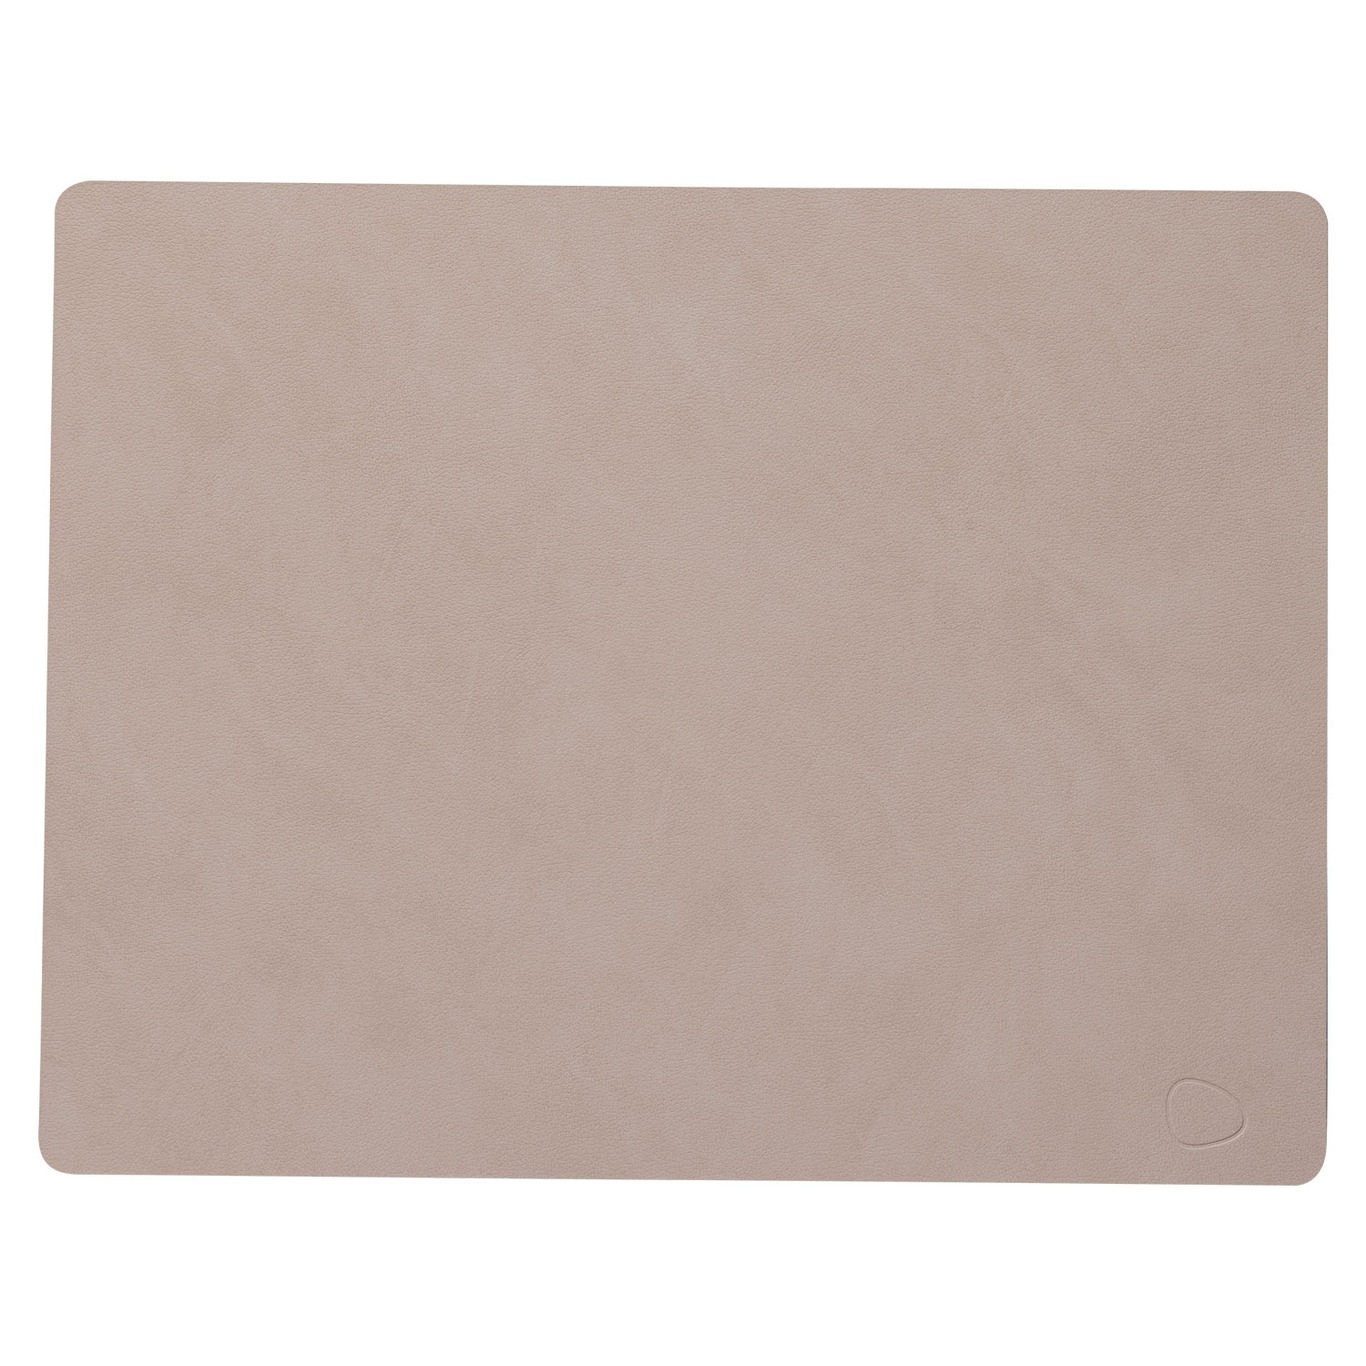 Square L Placemat Nupo 35x45 cm, Clay Brown